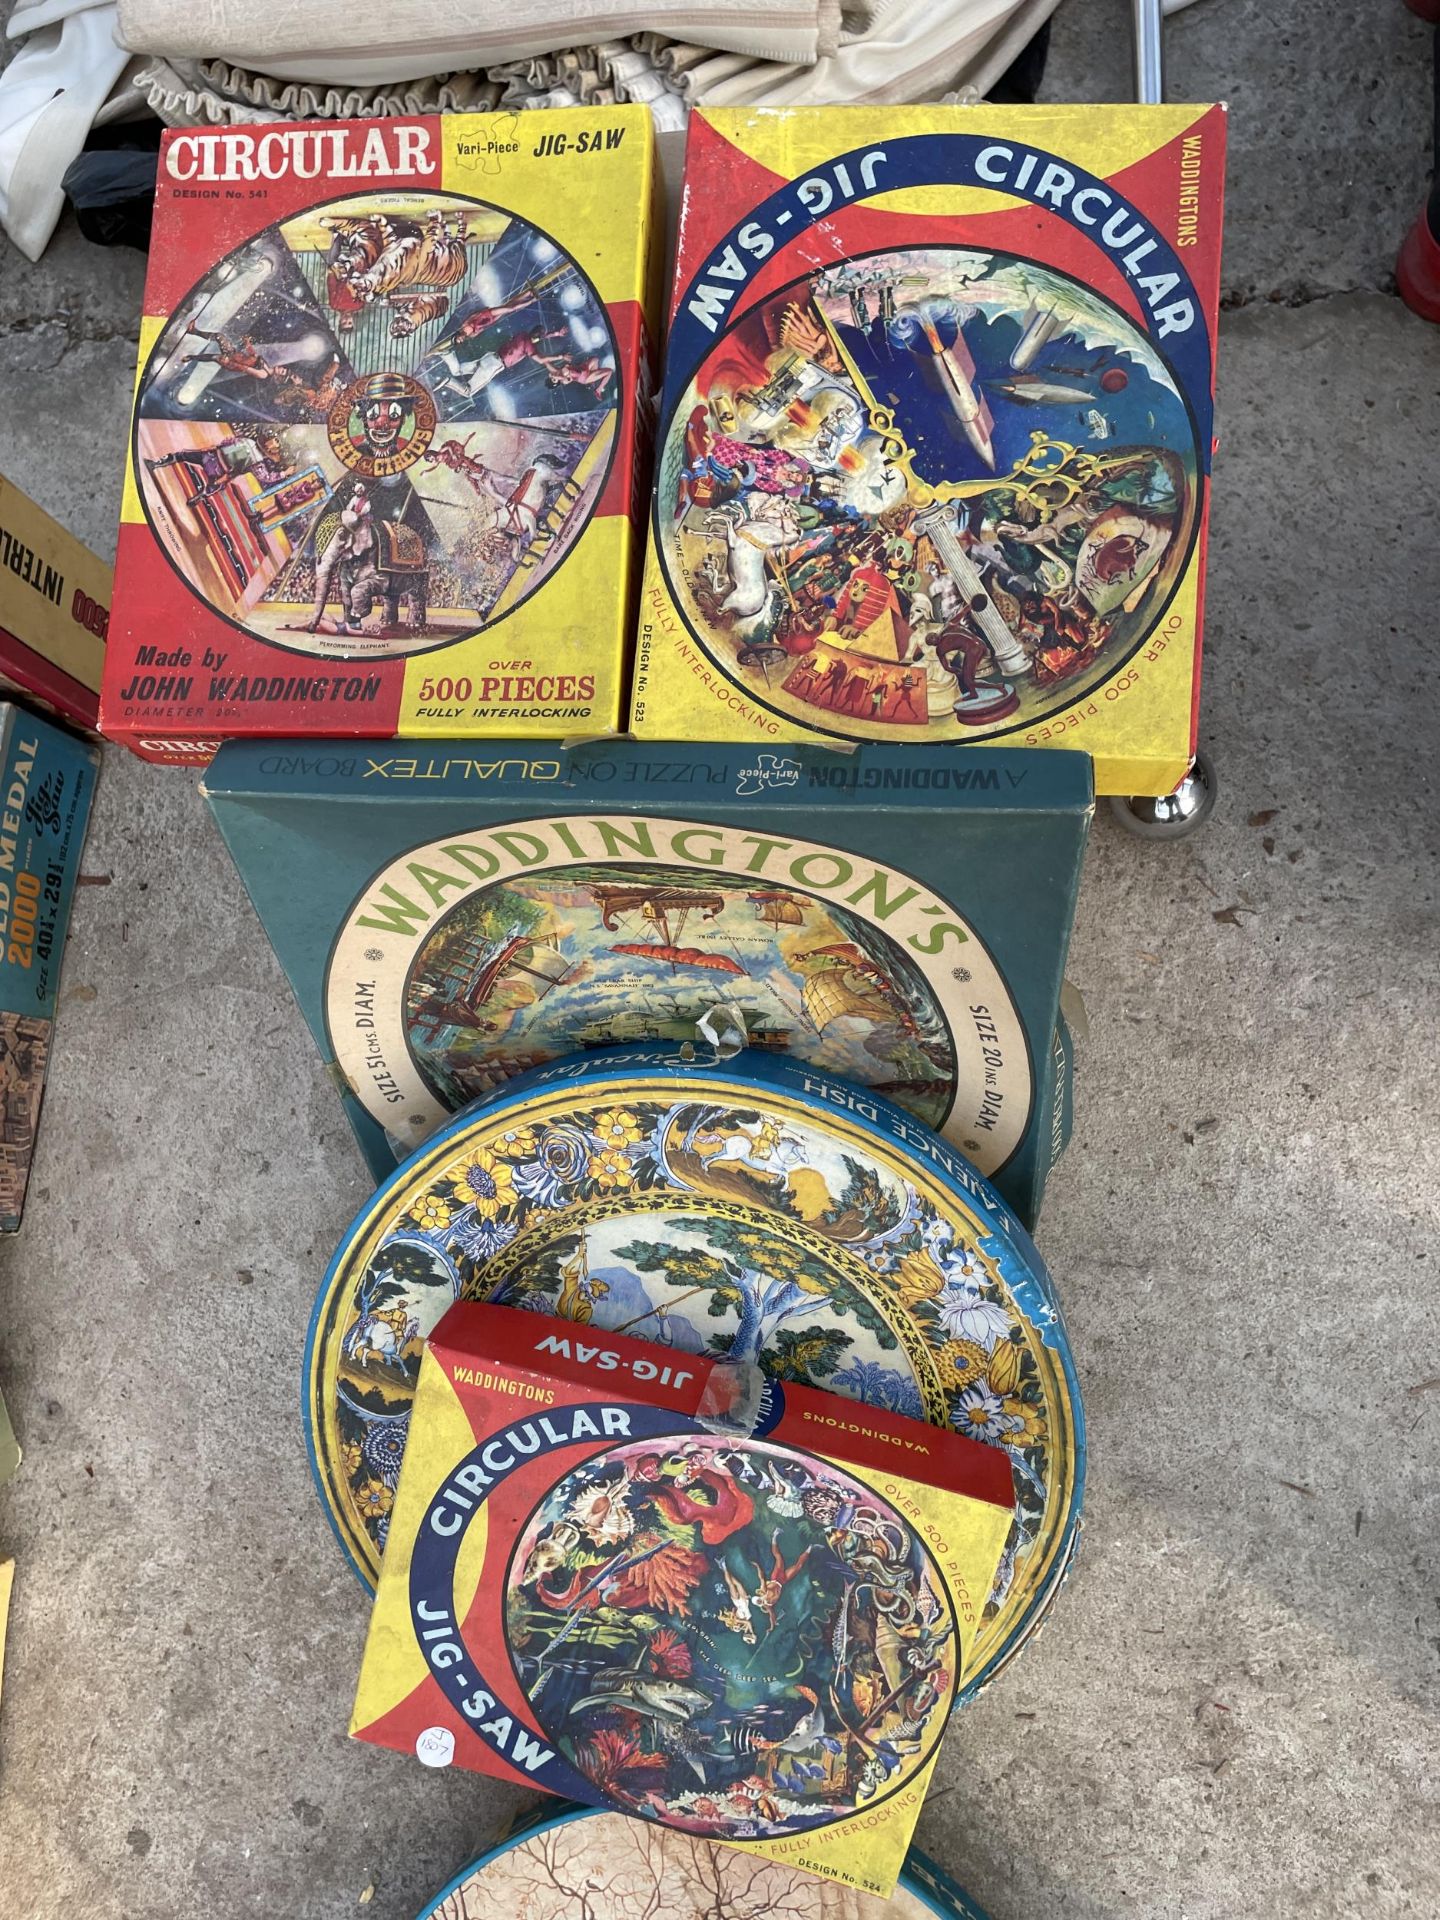 AN ASSORTMENT OF VARIOUS VINTAGE JIGSAW PUZZLES - Image 2 of 3